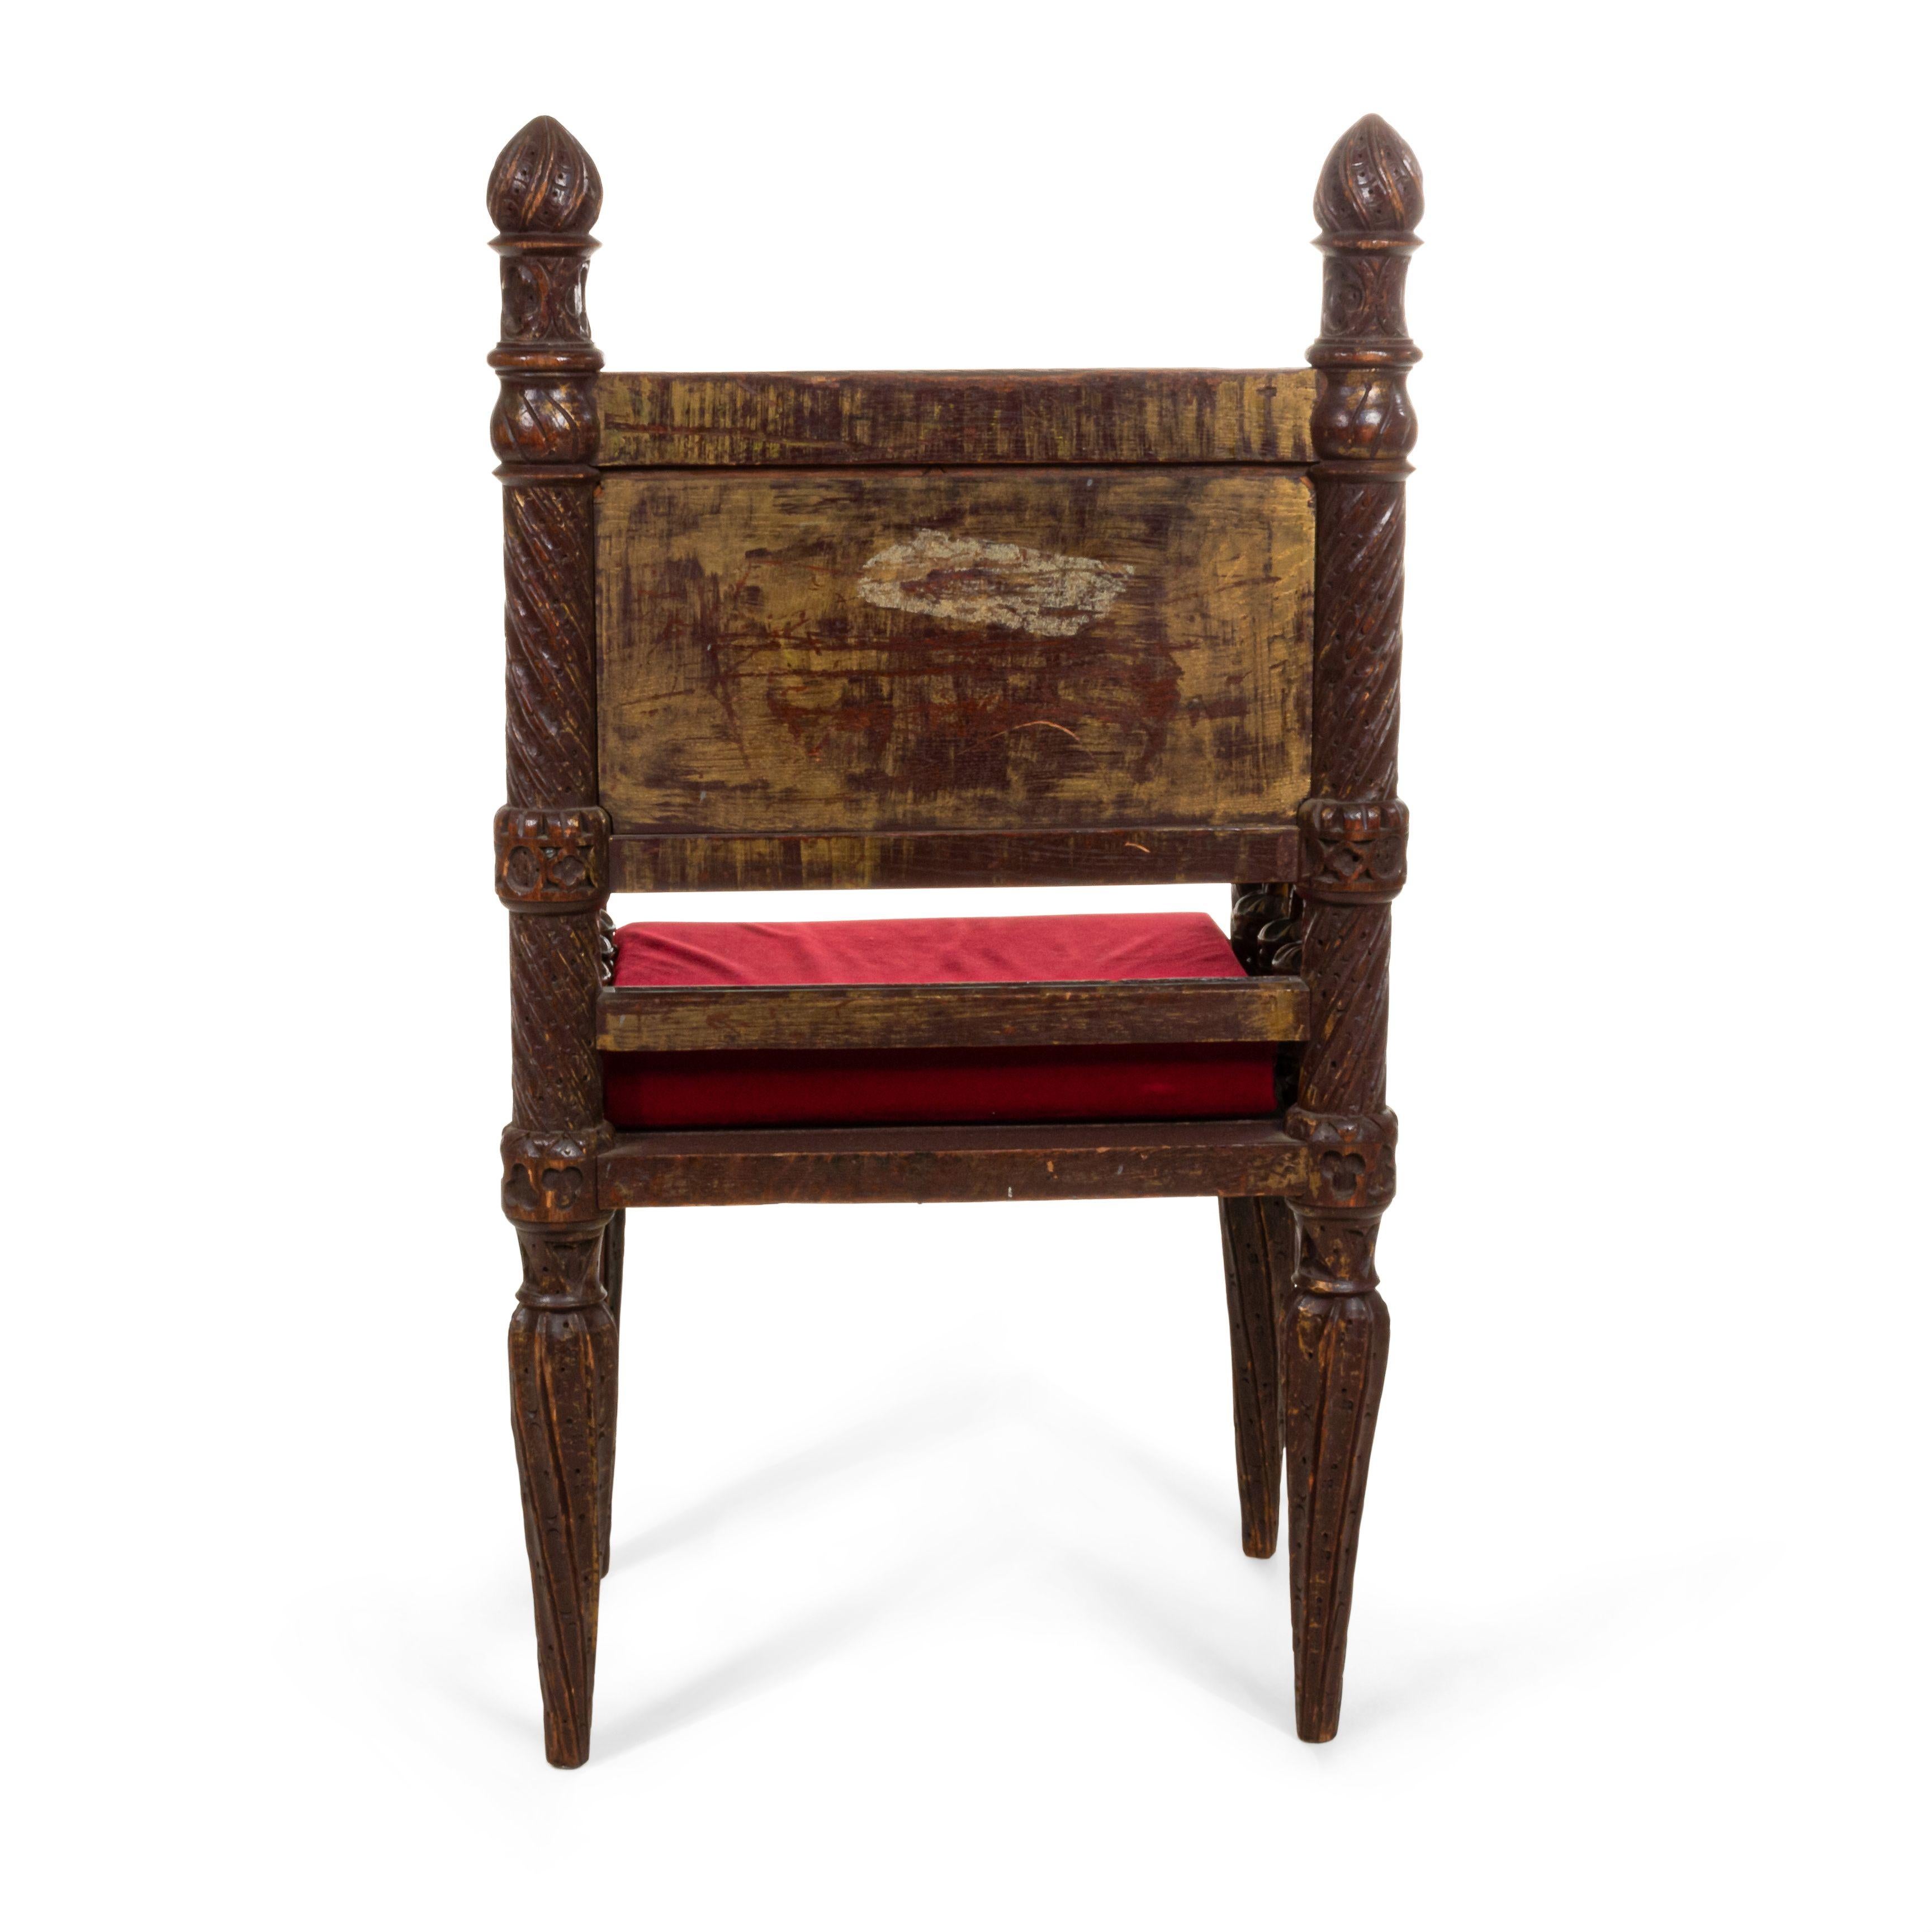 Gothic Revival Style 19th Century Burgundy Arm Chair In Good Condition For Sale In New York, NY